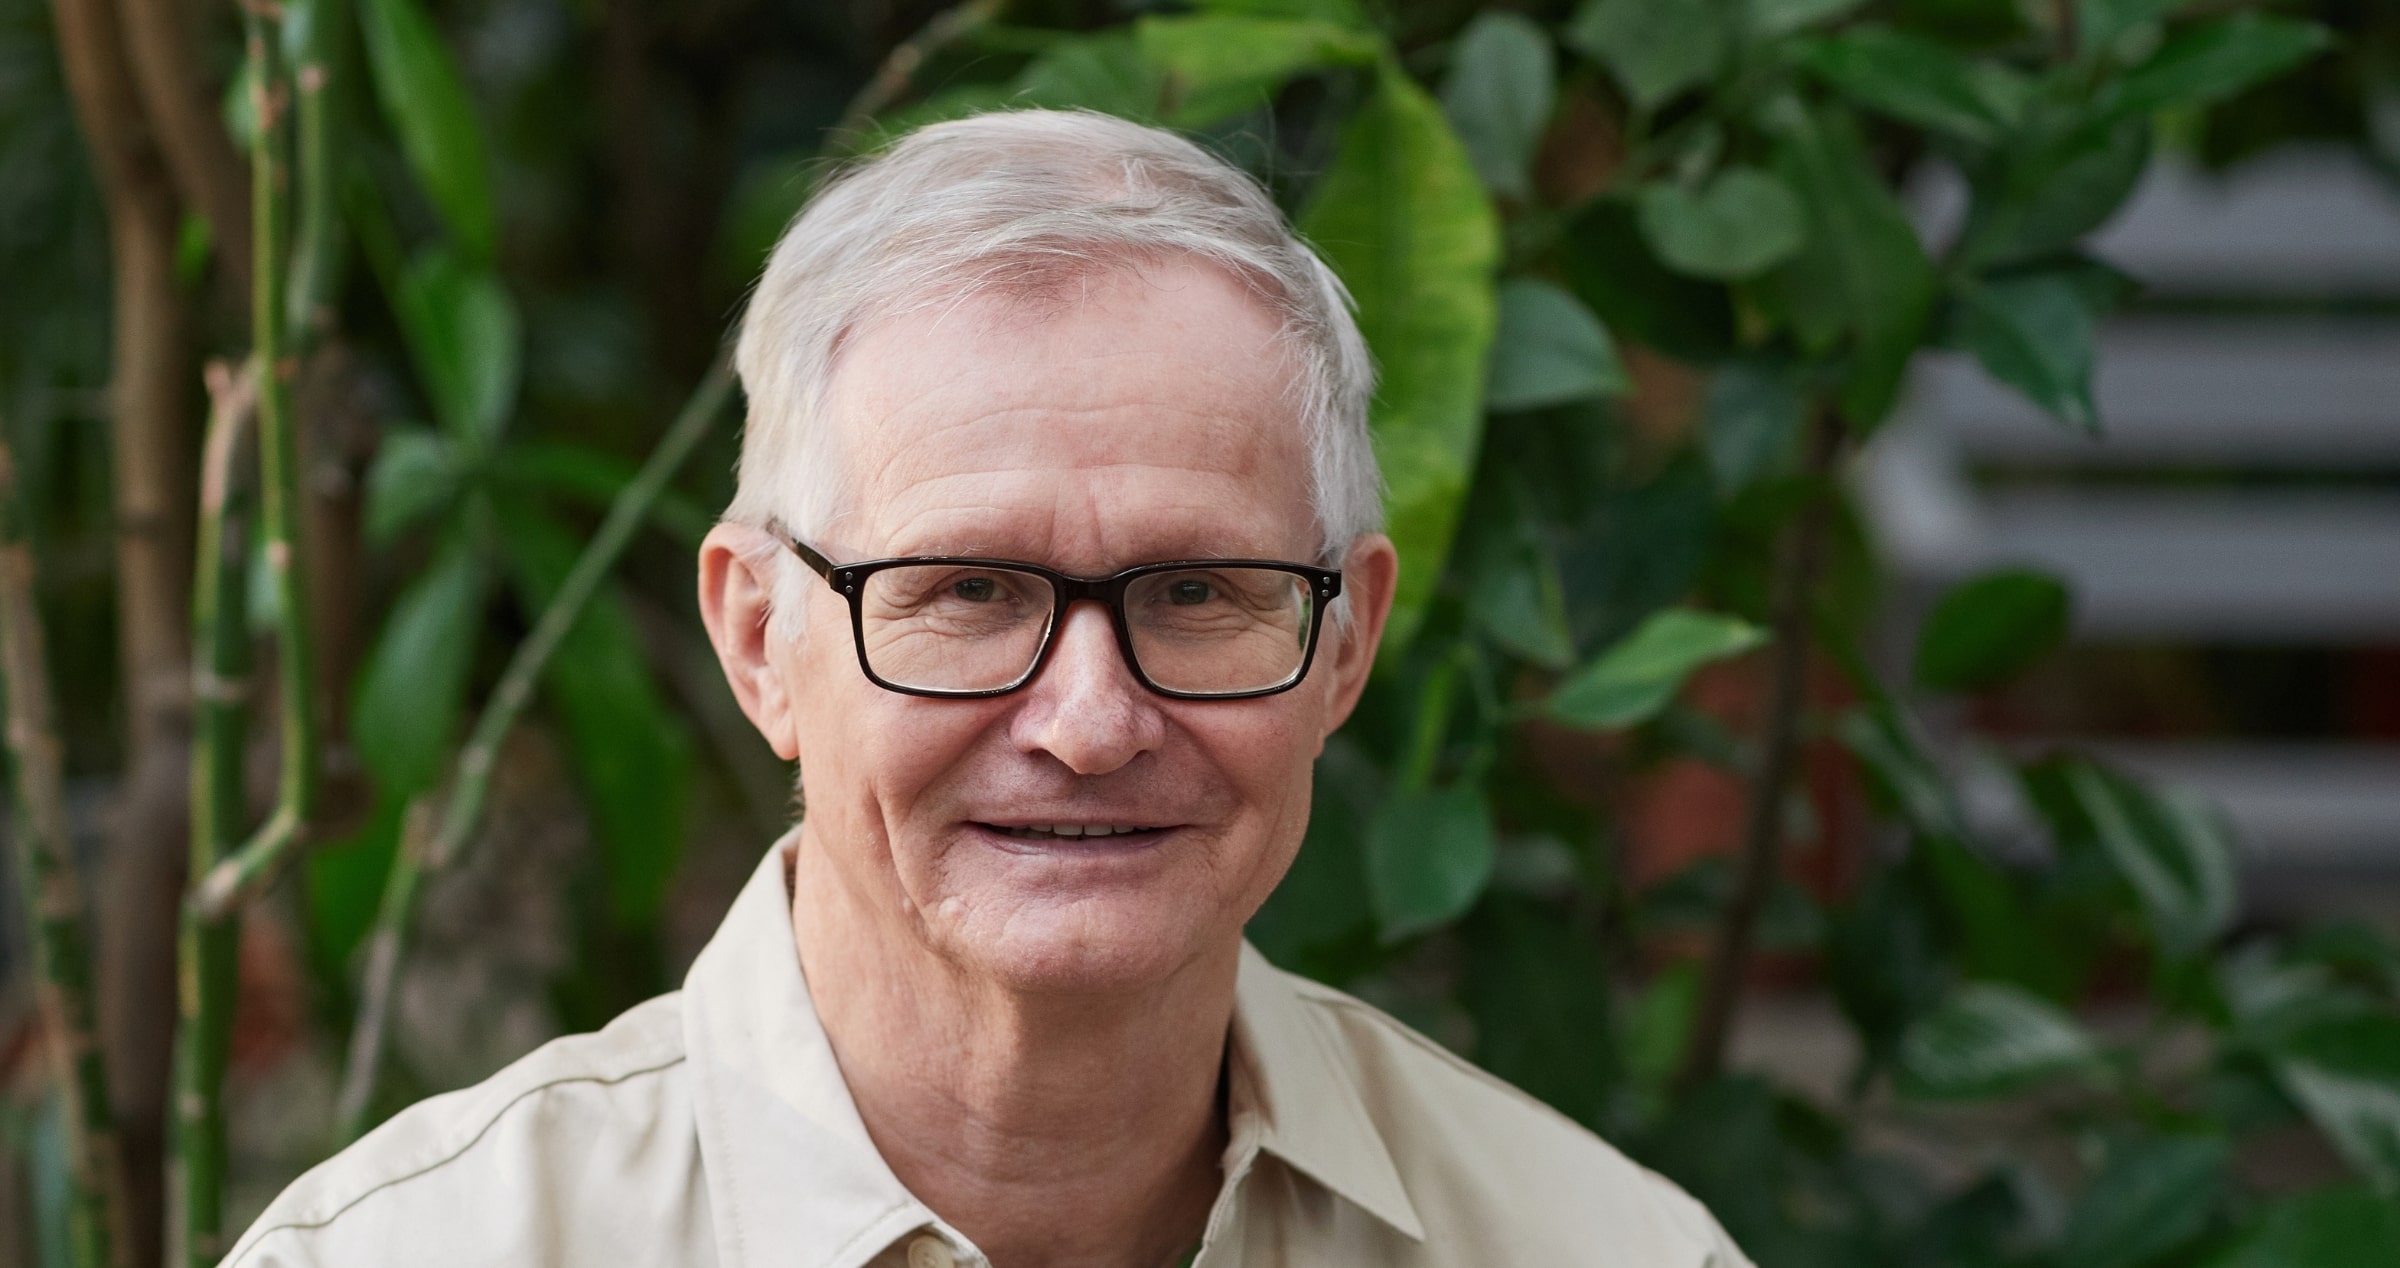 Image of 75 year old man in glasses with greenery in background